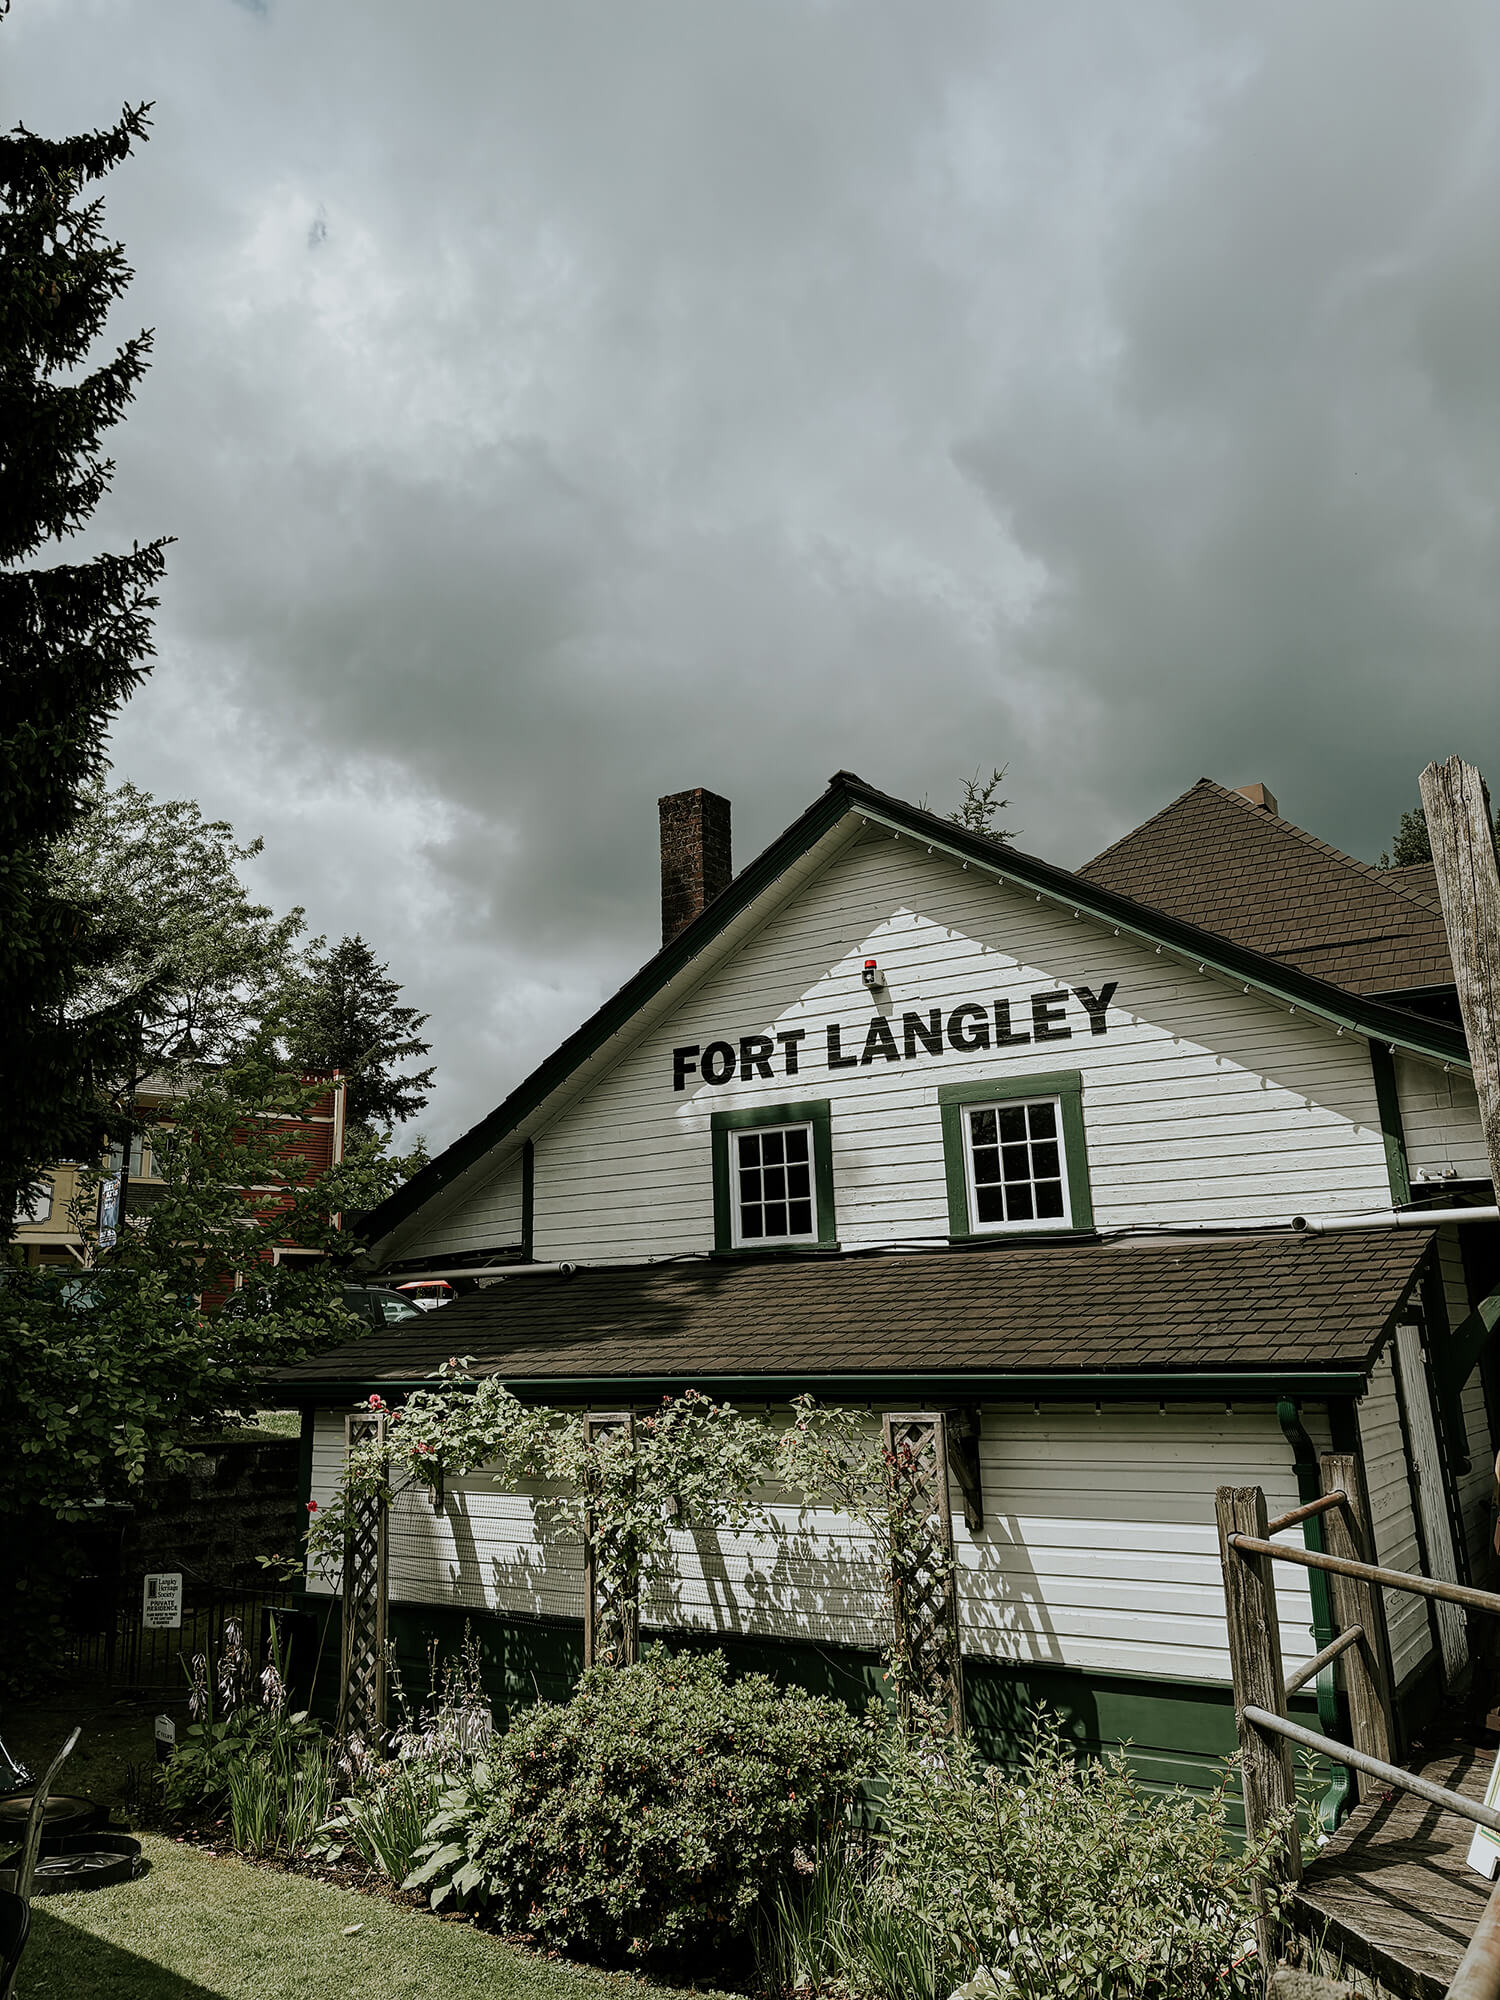 A picture of the Heritage CNR Station in Fort Langley, with bushes and trees in front and a cloudy sky